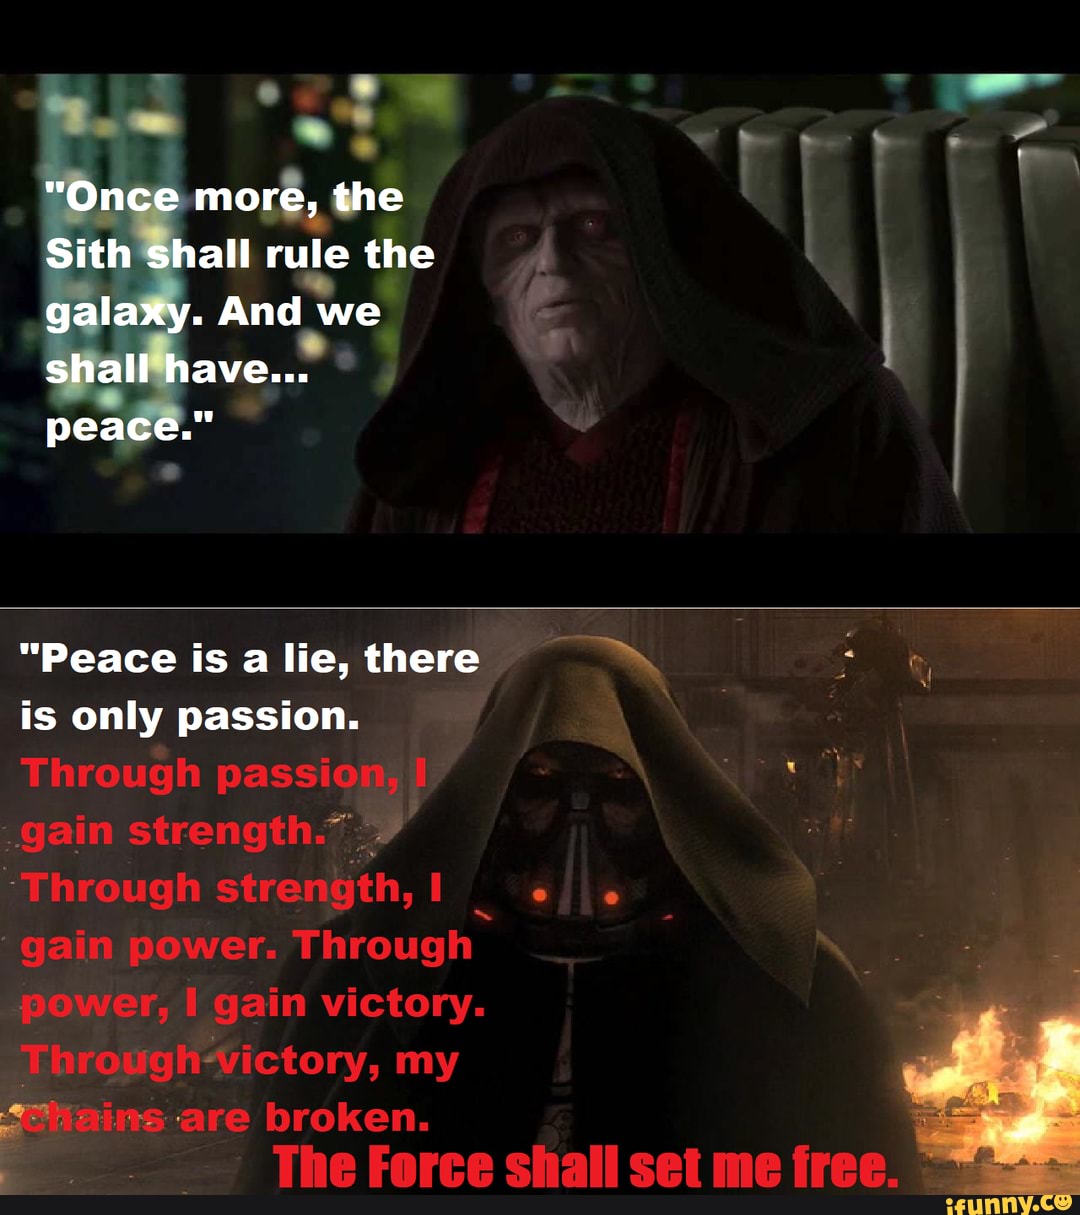 once more the sith will rule the galaxy